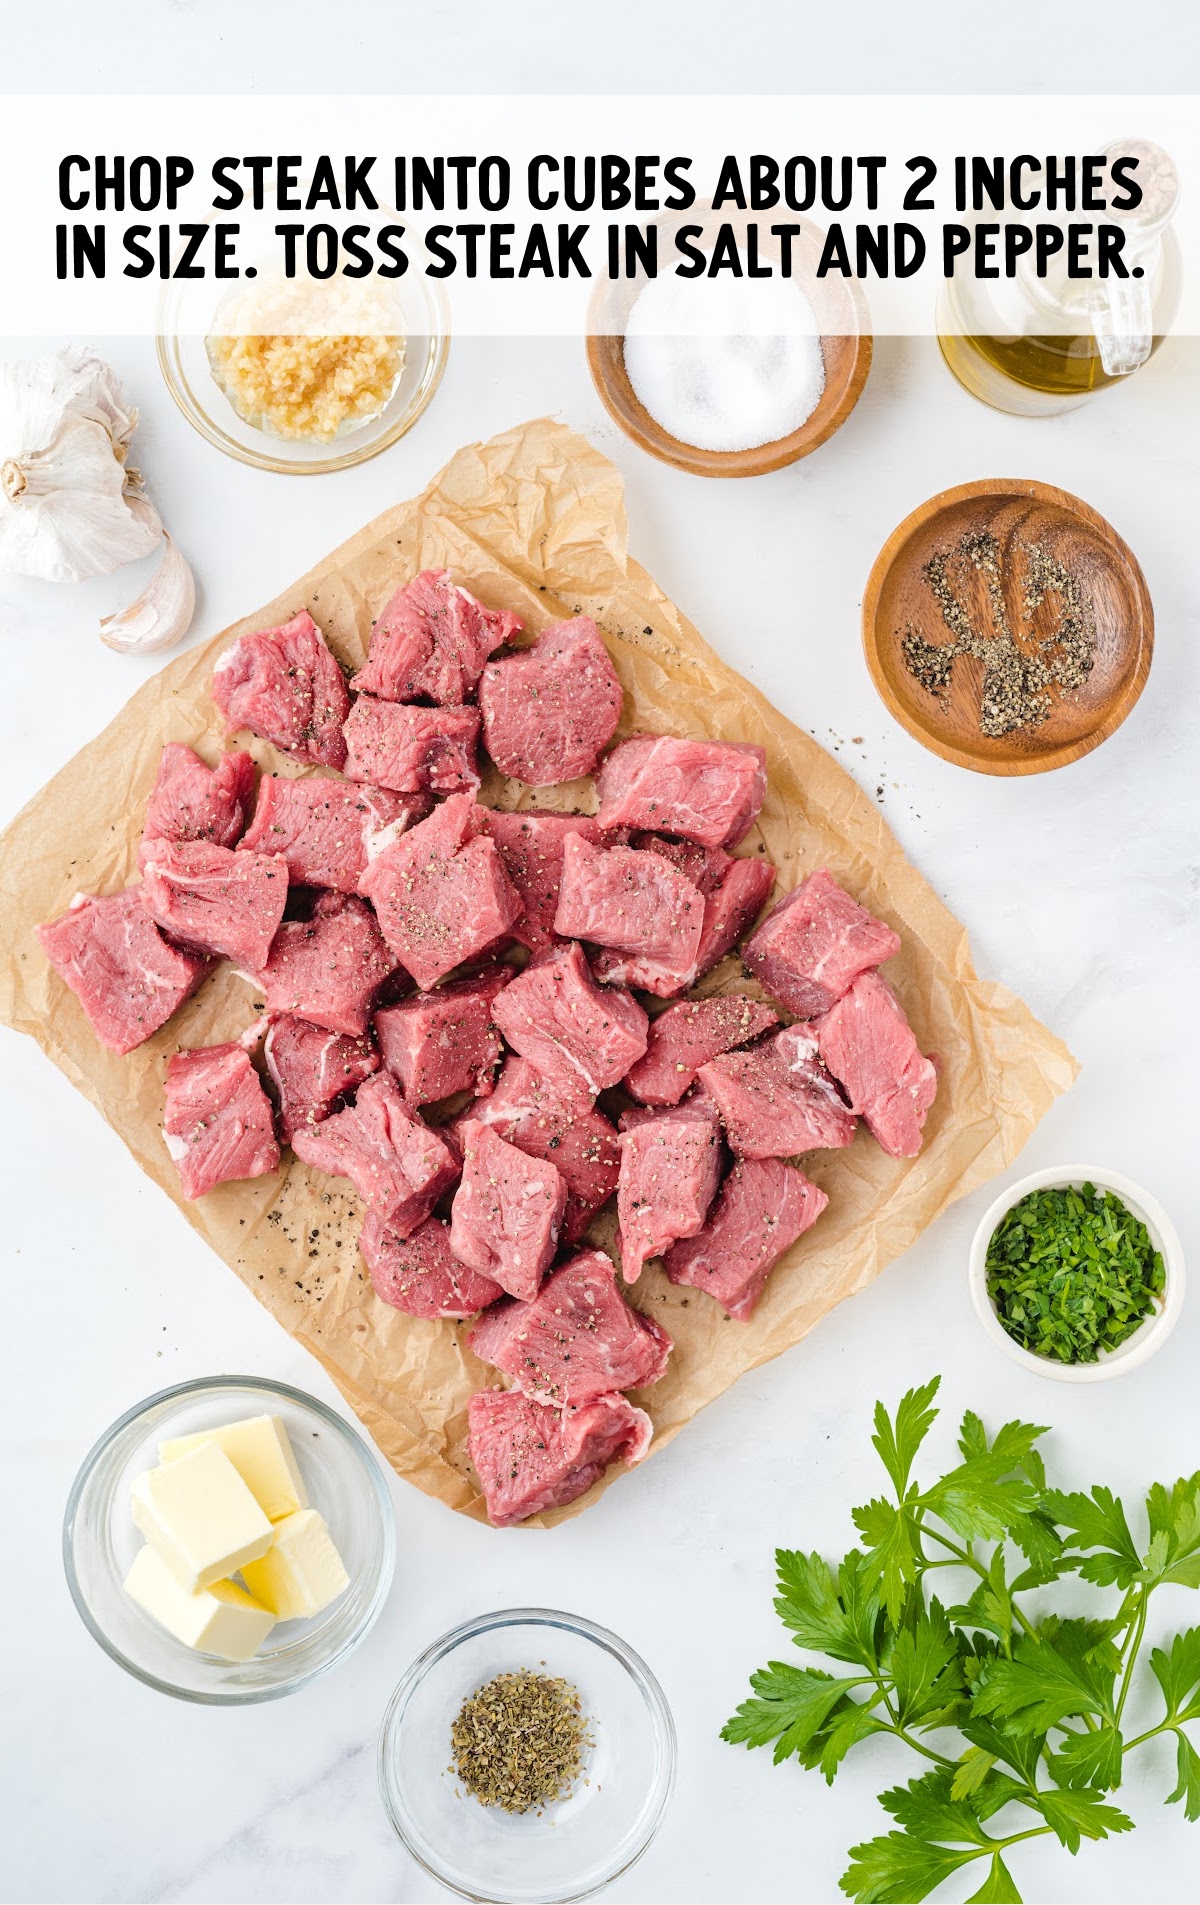 steak cut into cubes and tossed into salt and pepper